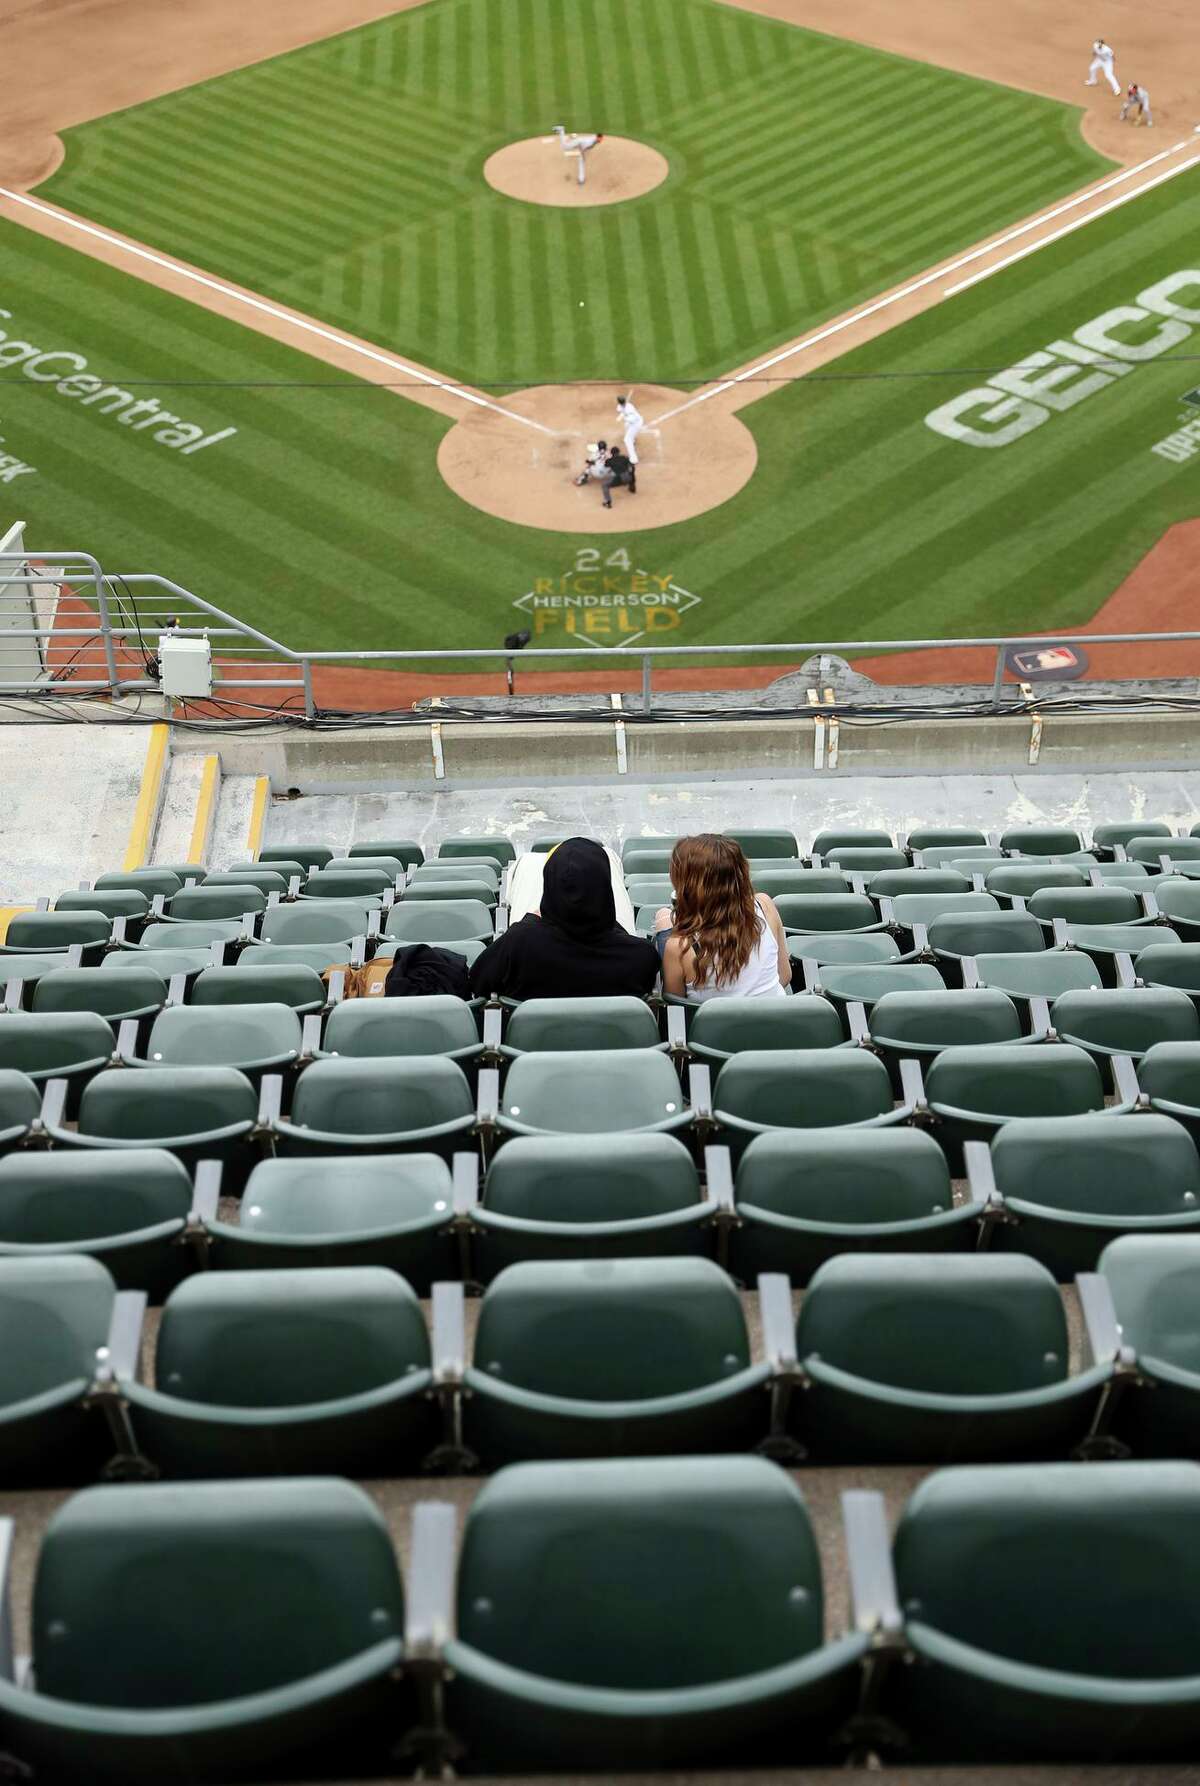 The Oakland Athletics Coliseum was nearly-empty in their first homestand as fan frustration mounts over ticket price hikes, roster turnover and threats to move. A couple watches the action from a mostly empty upper deck as Oakland Athletics play Baltimore Orioles in front of a couple thousand fans during MLB game at Oakland Coliseum in Oakland, Calif, on Wednesday, April 20, 2022.